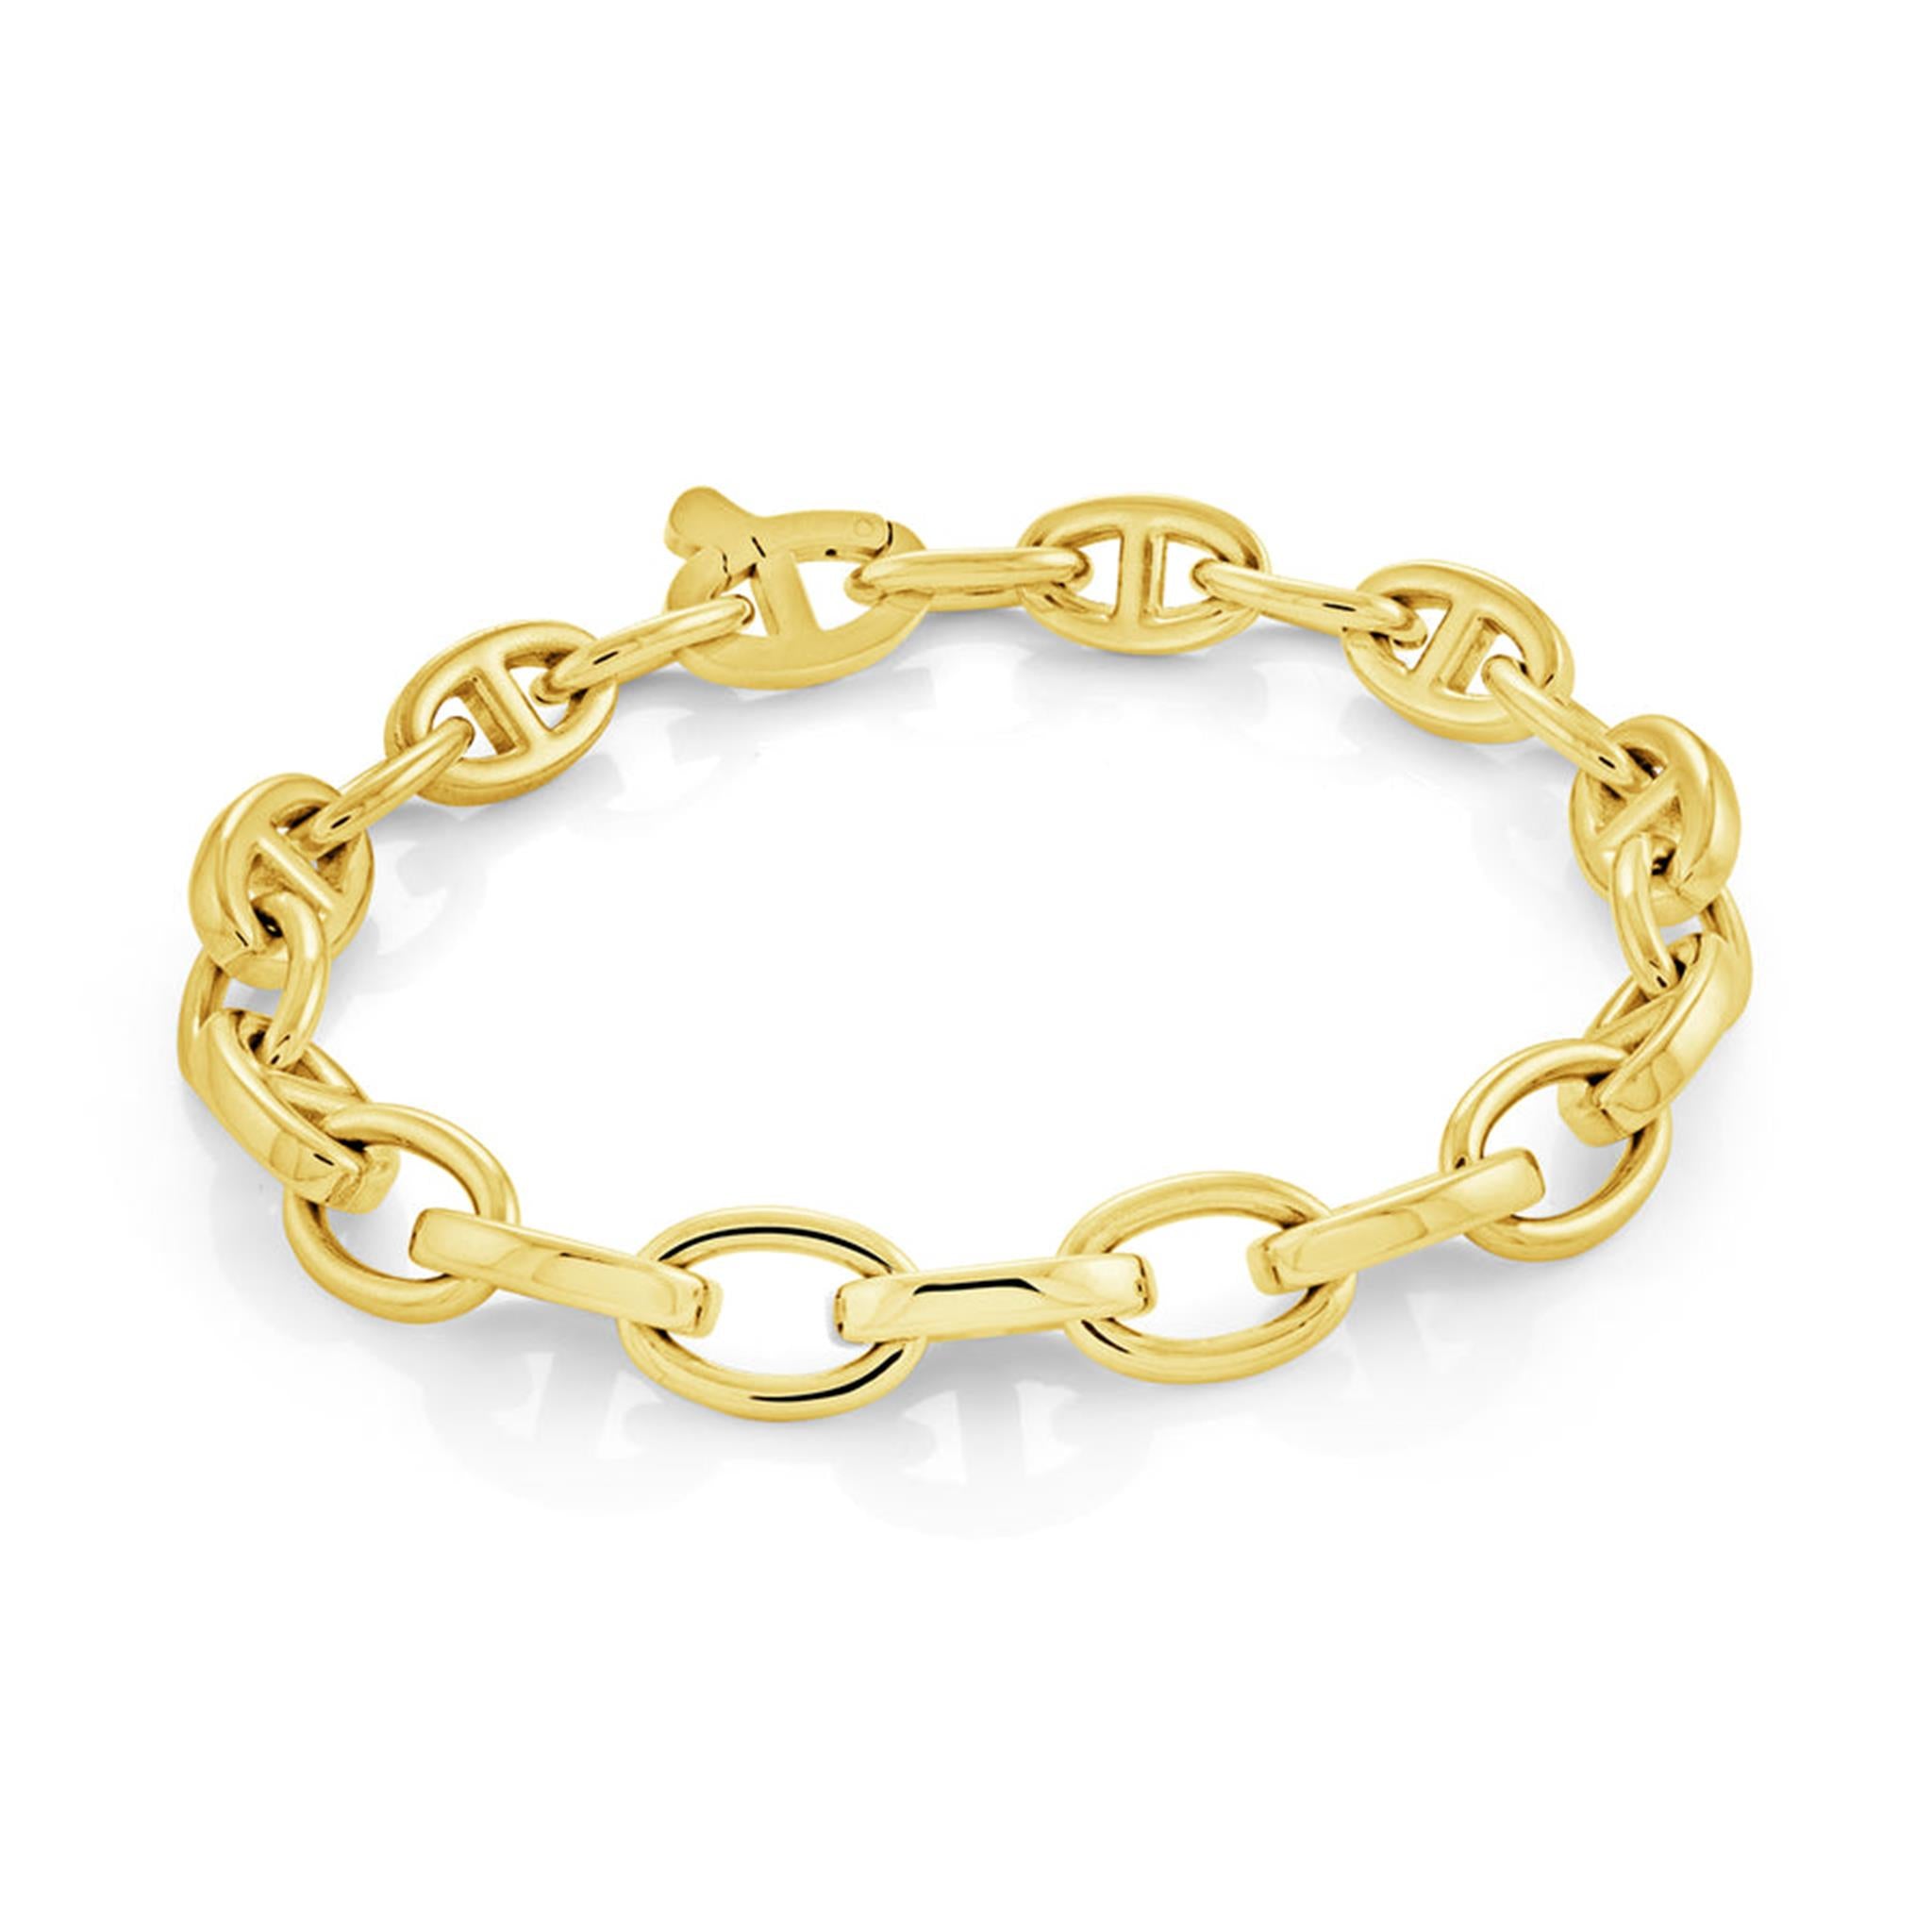 Real 10K Yellow Gold Fancy 3D Hollow Puff Gucci Mariner Link 5mm Bracelet  7.50